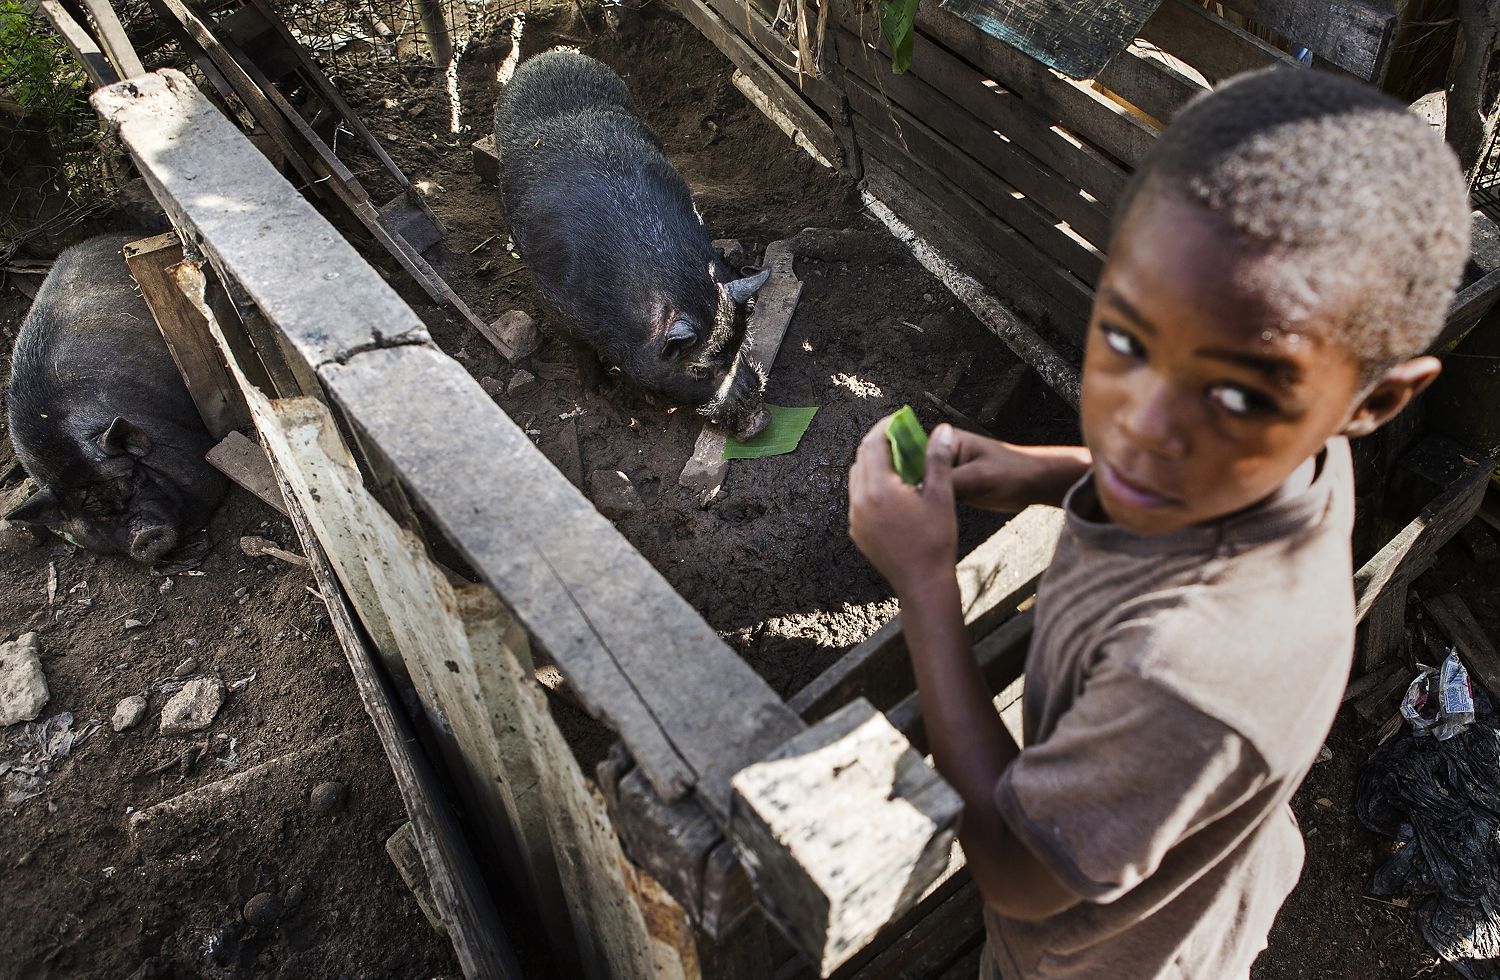 Abdel Olma, 8, feeds the family pigs, Chape and Nopi while his mother, Rosalda Olma sorts through what remains of their home in Loiza. Rosalda had to seek psychiatric help for Abdel following the storm. Image by Ryan Michalesko. Puerto Rico, 2017.